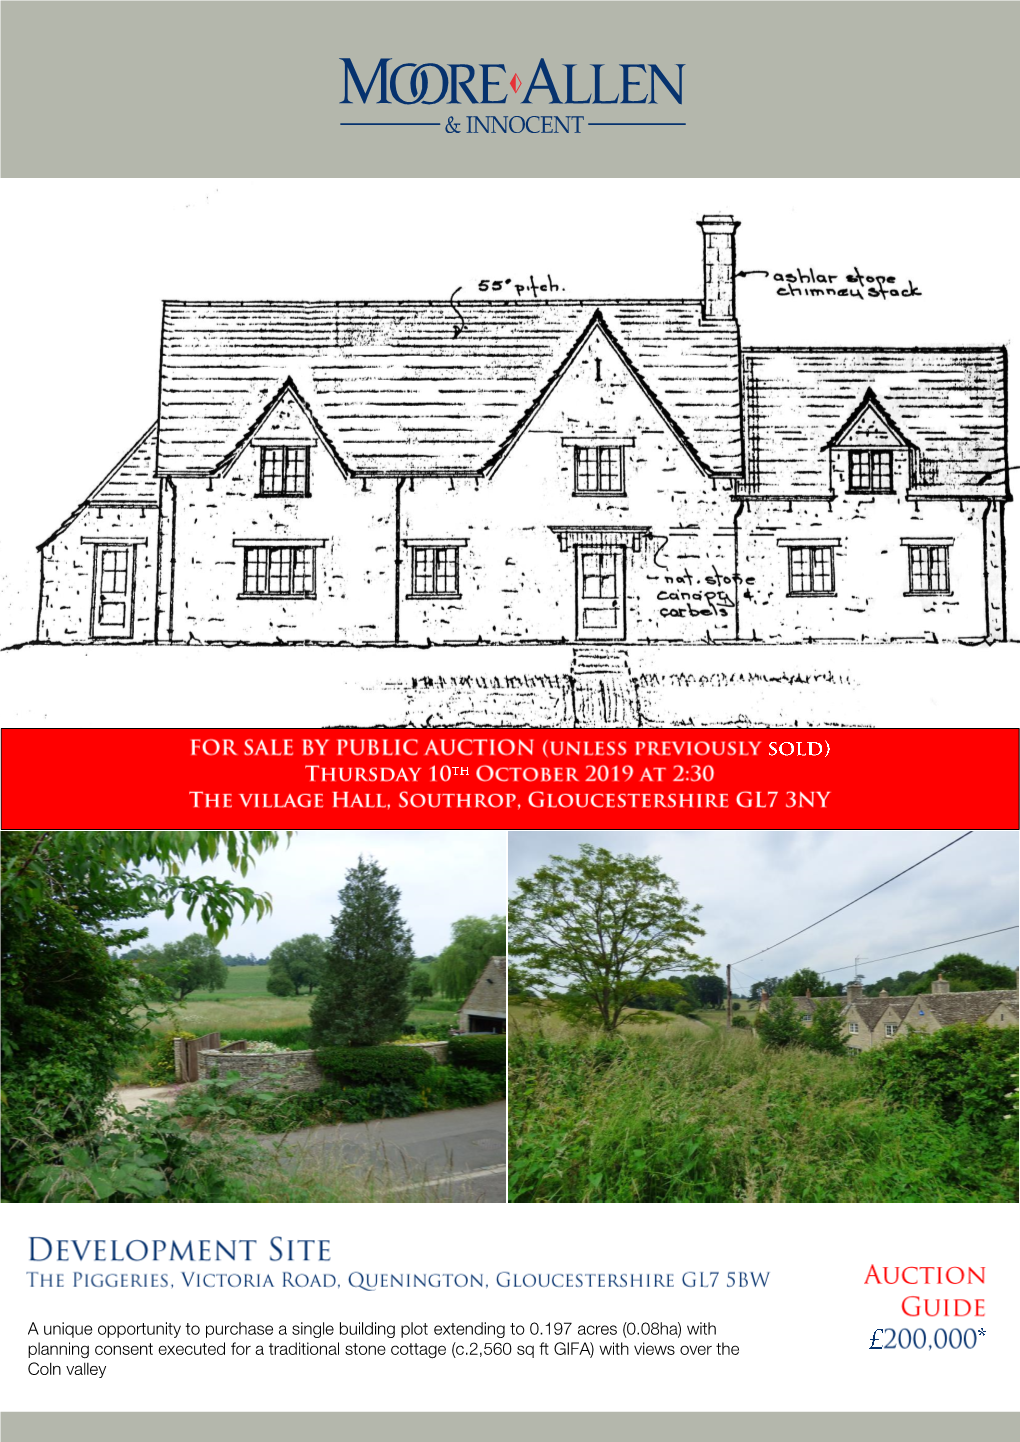 With Planning Consent Executed for At